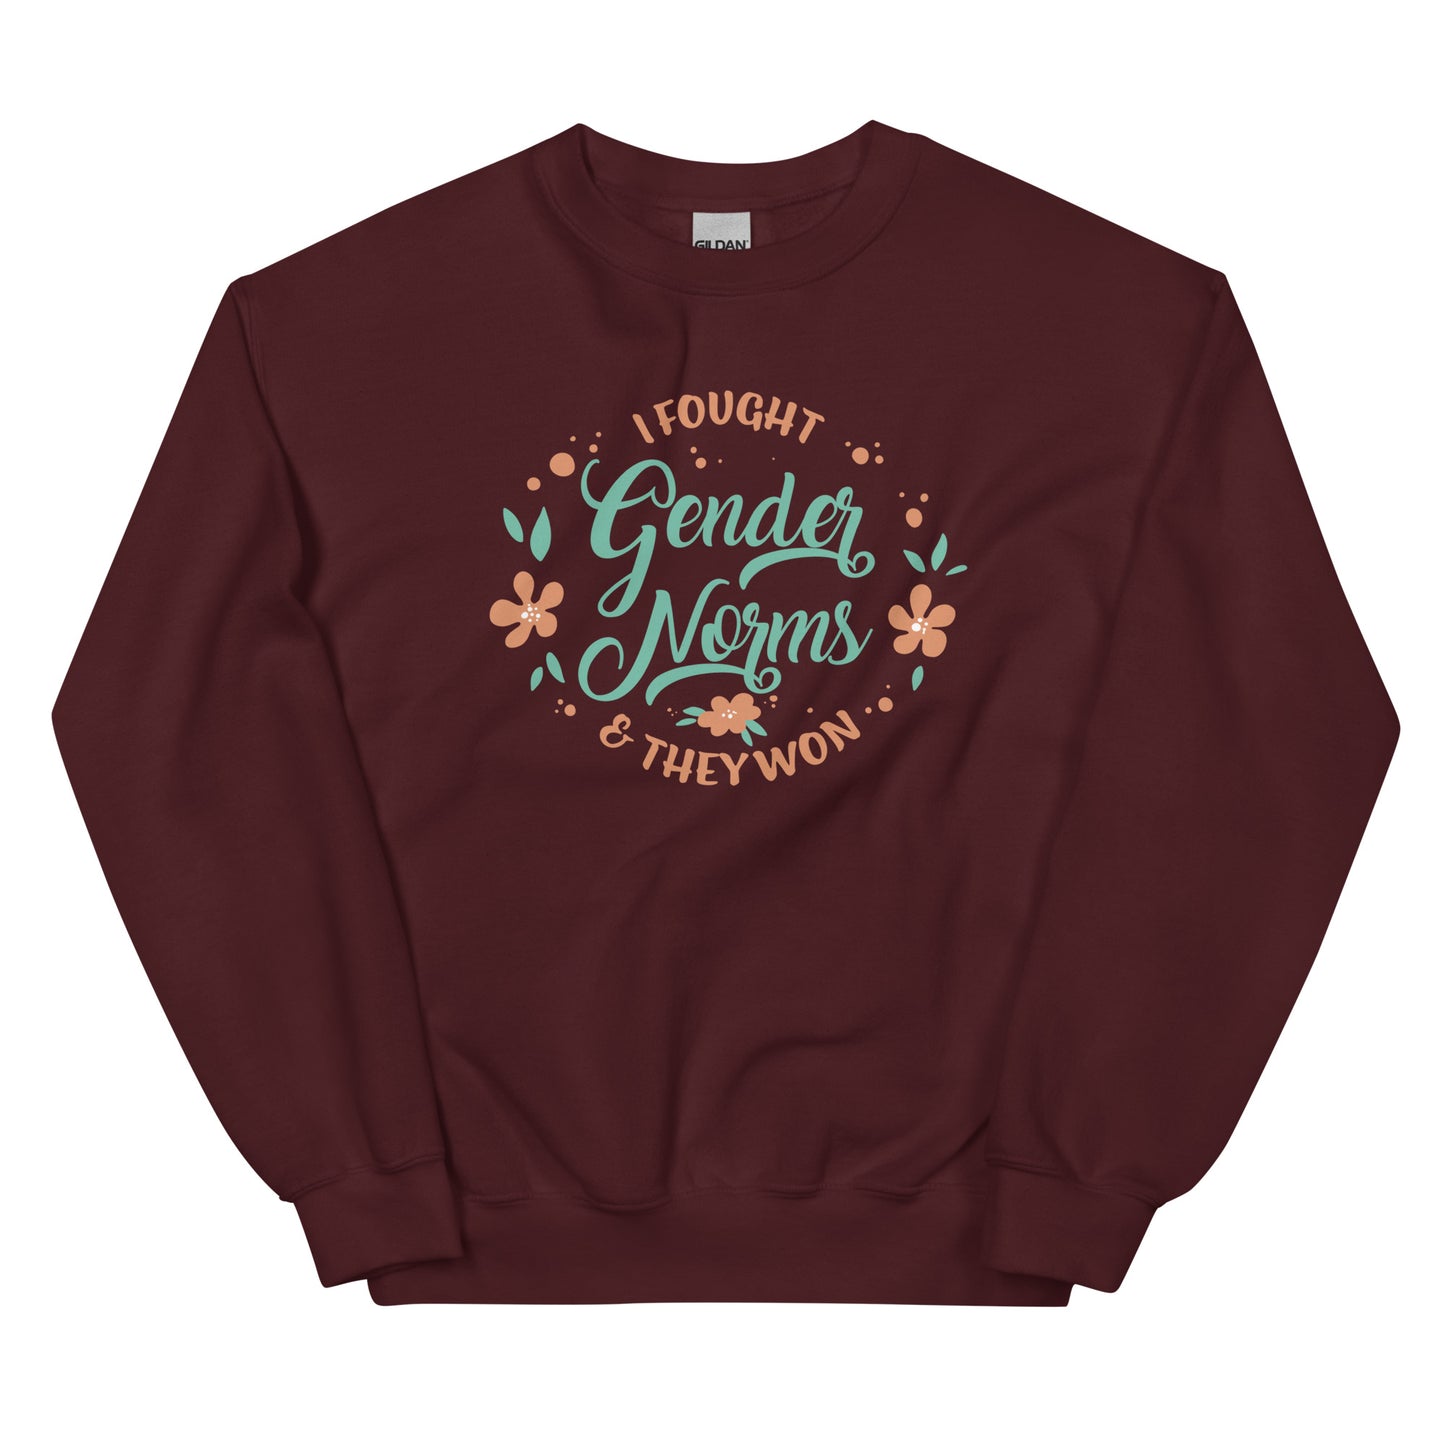 I Fought Gender Norms and They Won Unisex Sweatshirt